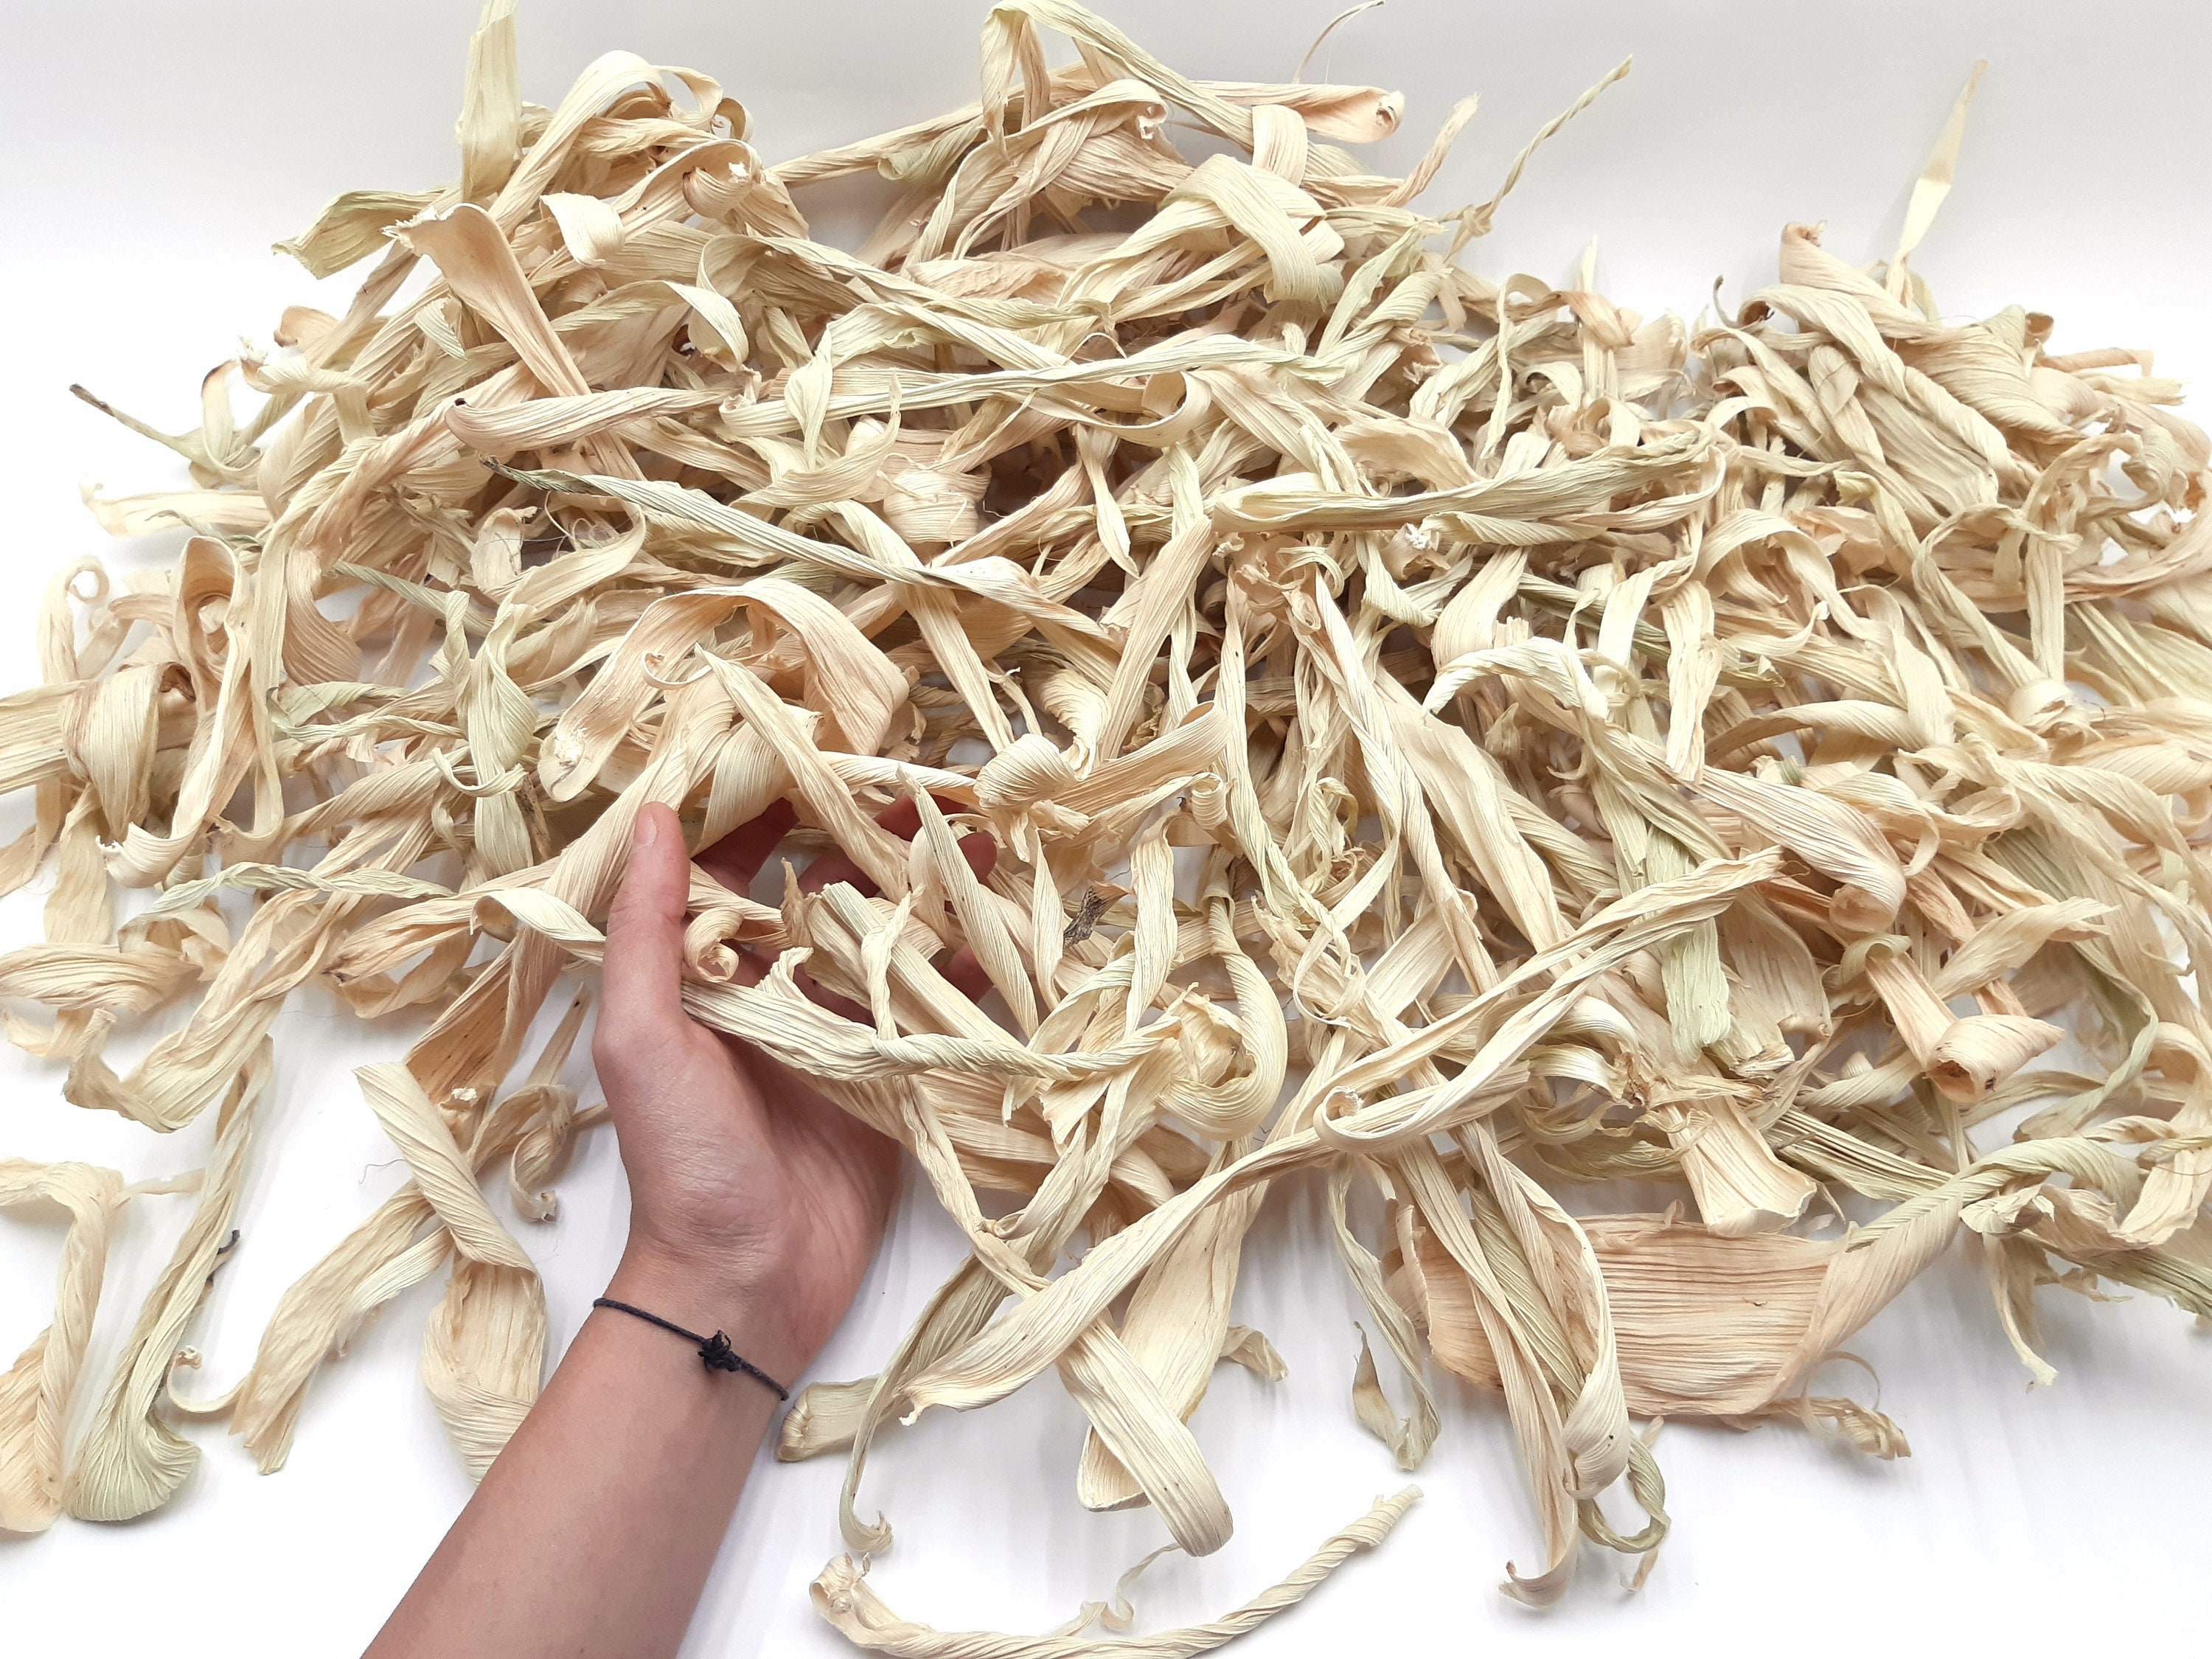 Organic Hand Cut Corn Husks for Tamales or Craft Projects. Package